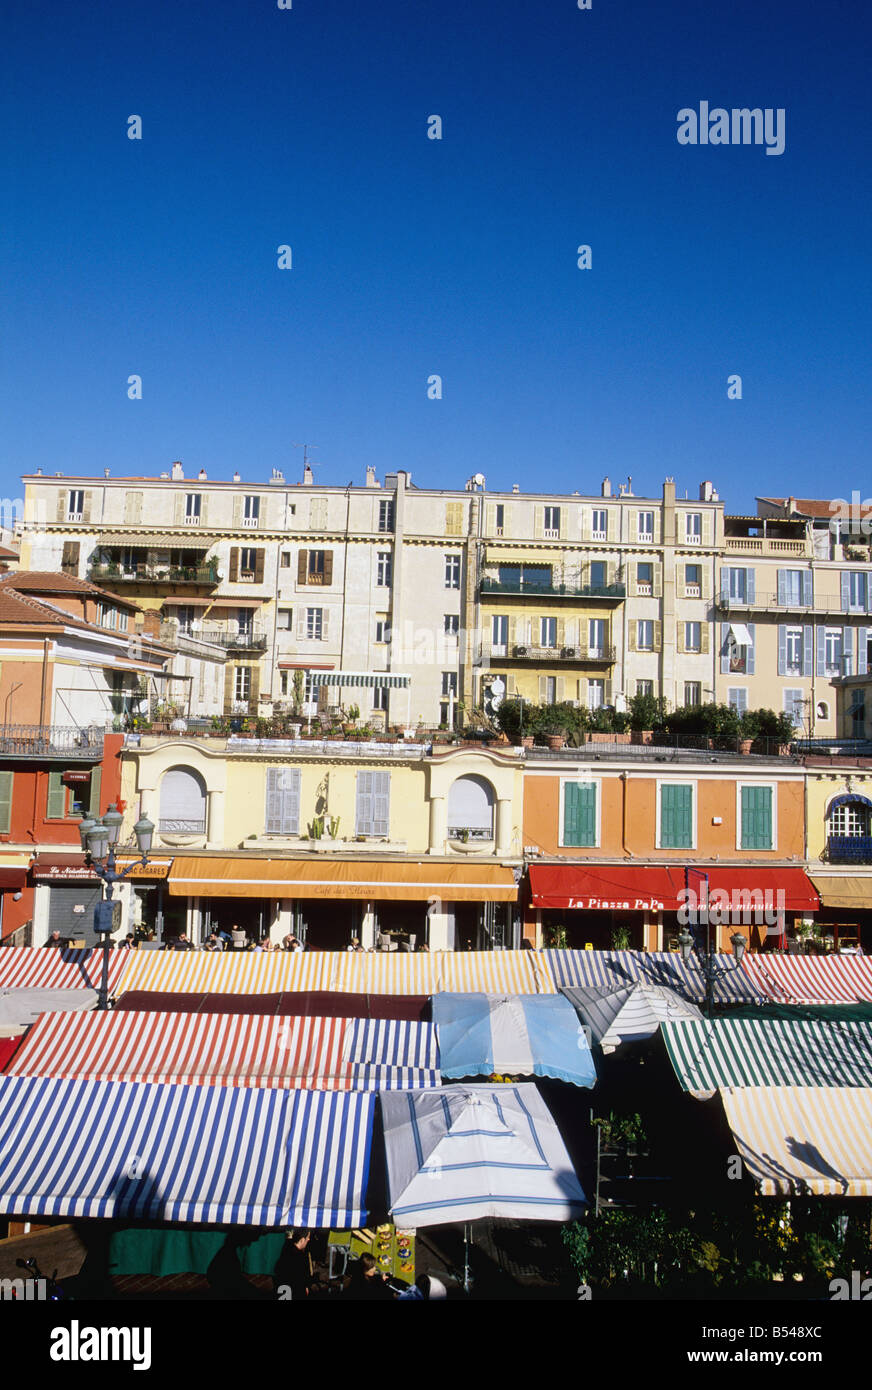 Cours Saleya market into the old town of Nice Alpes-Maritimes French Riviera Cote d'azur 06 paca France europe Stock Photo